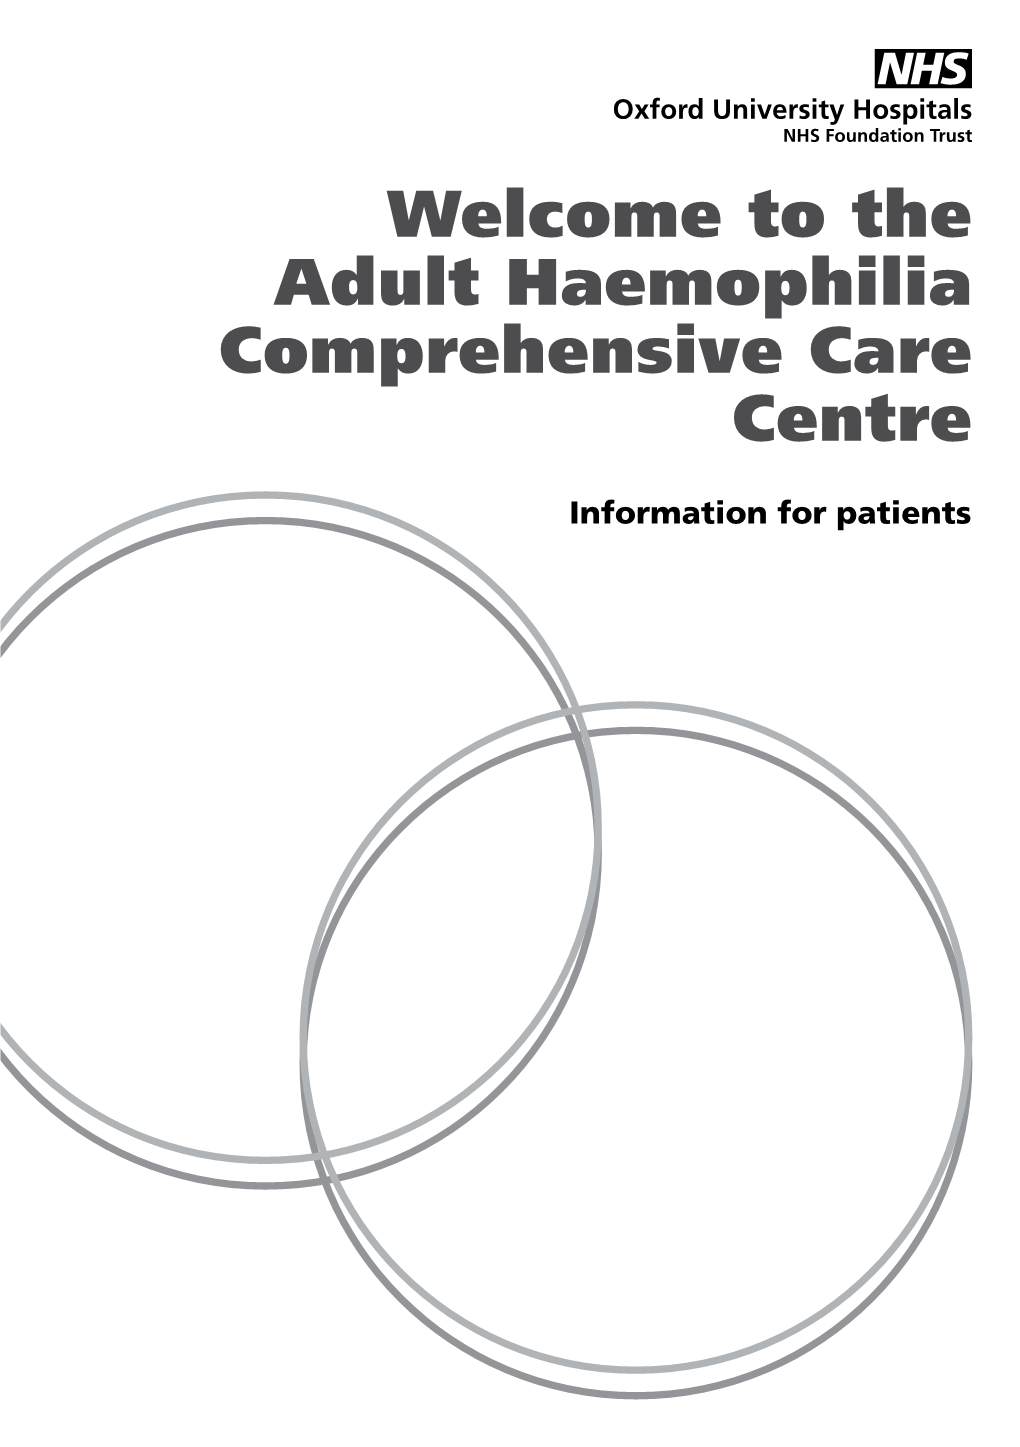 Welcome to the Adult Haemophilia Comprehensive Care Centre